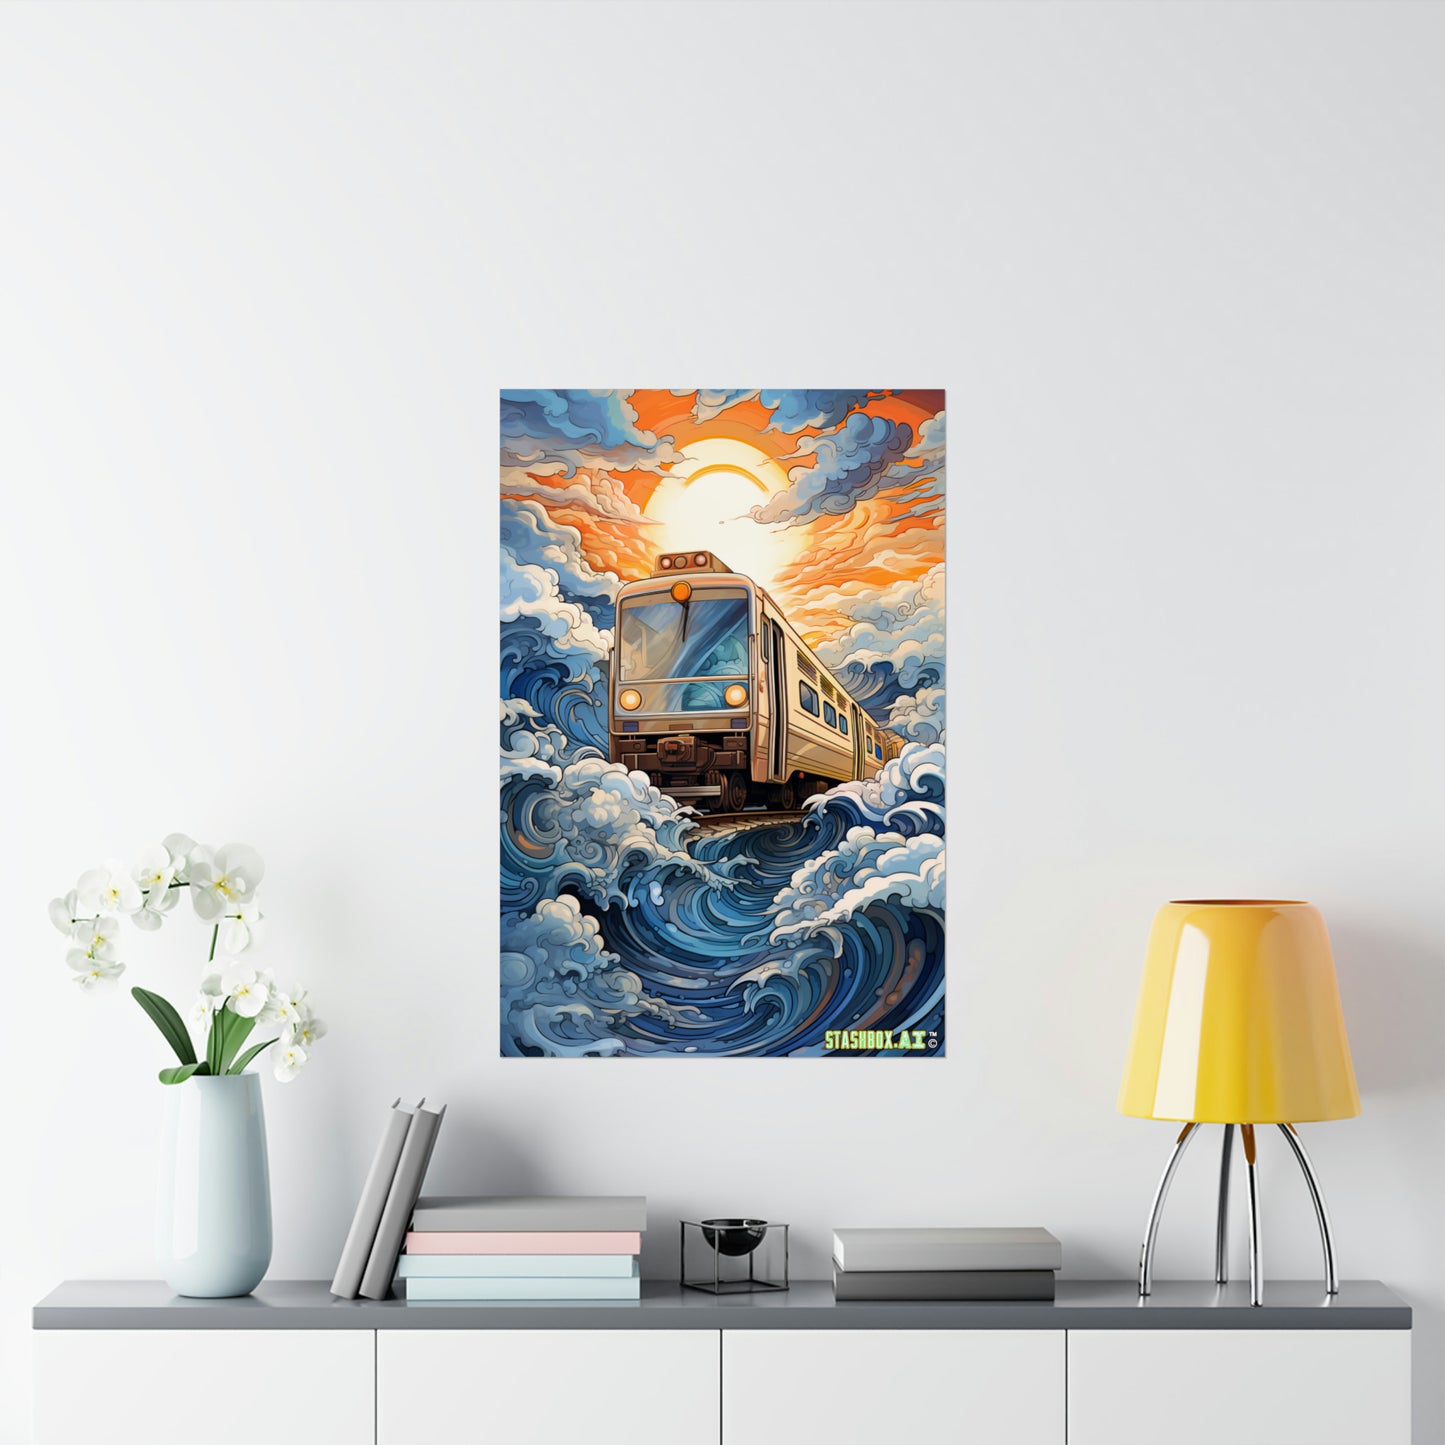 Stashbox Train Design #015: Psychedelic Train in Ocean Waves Poster